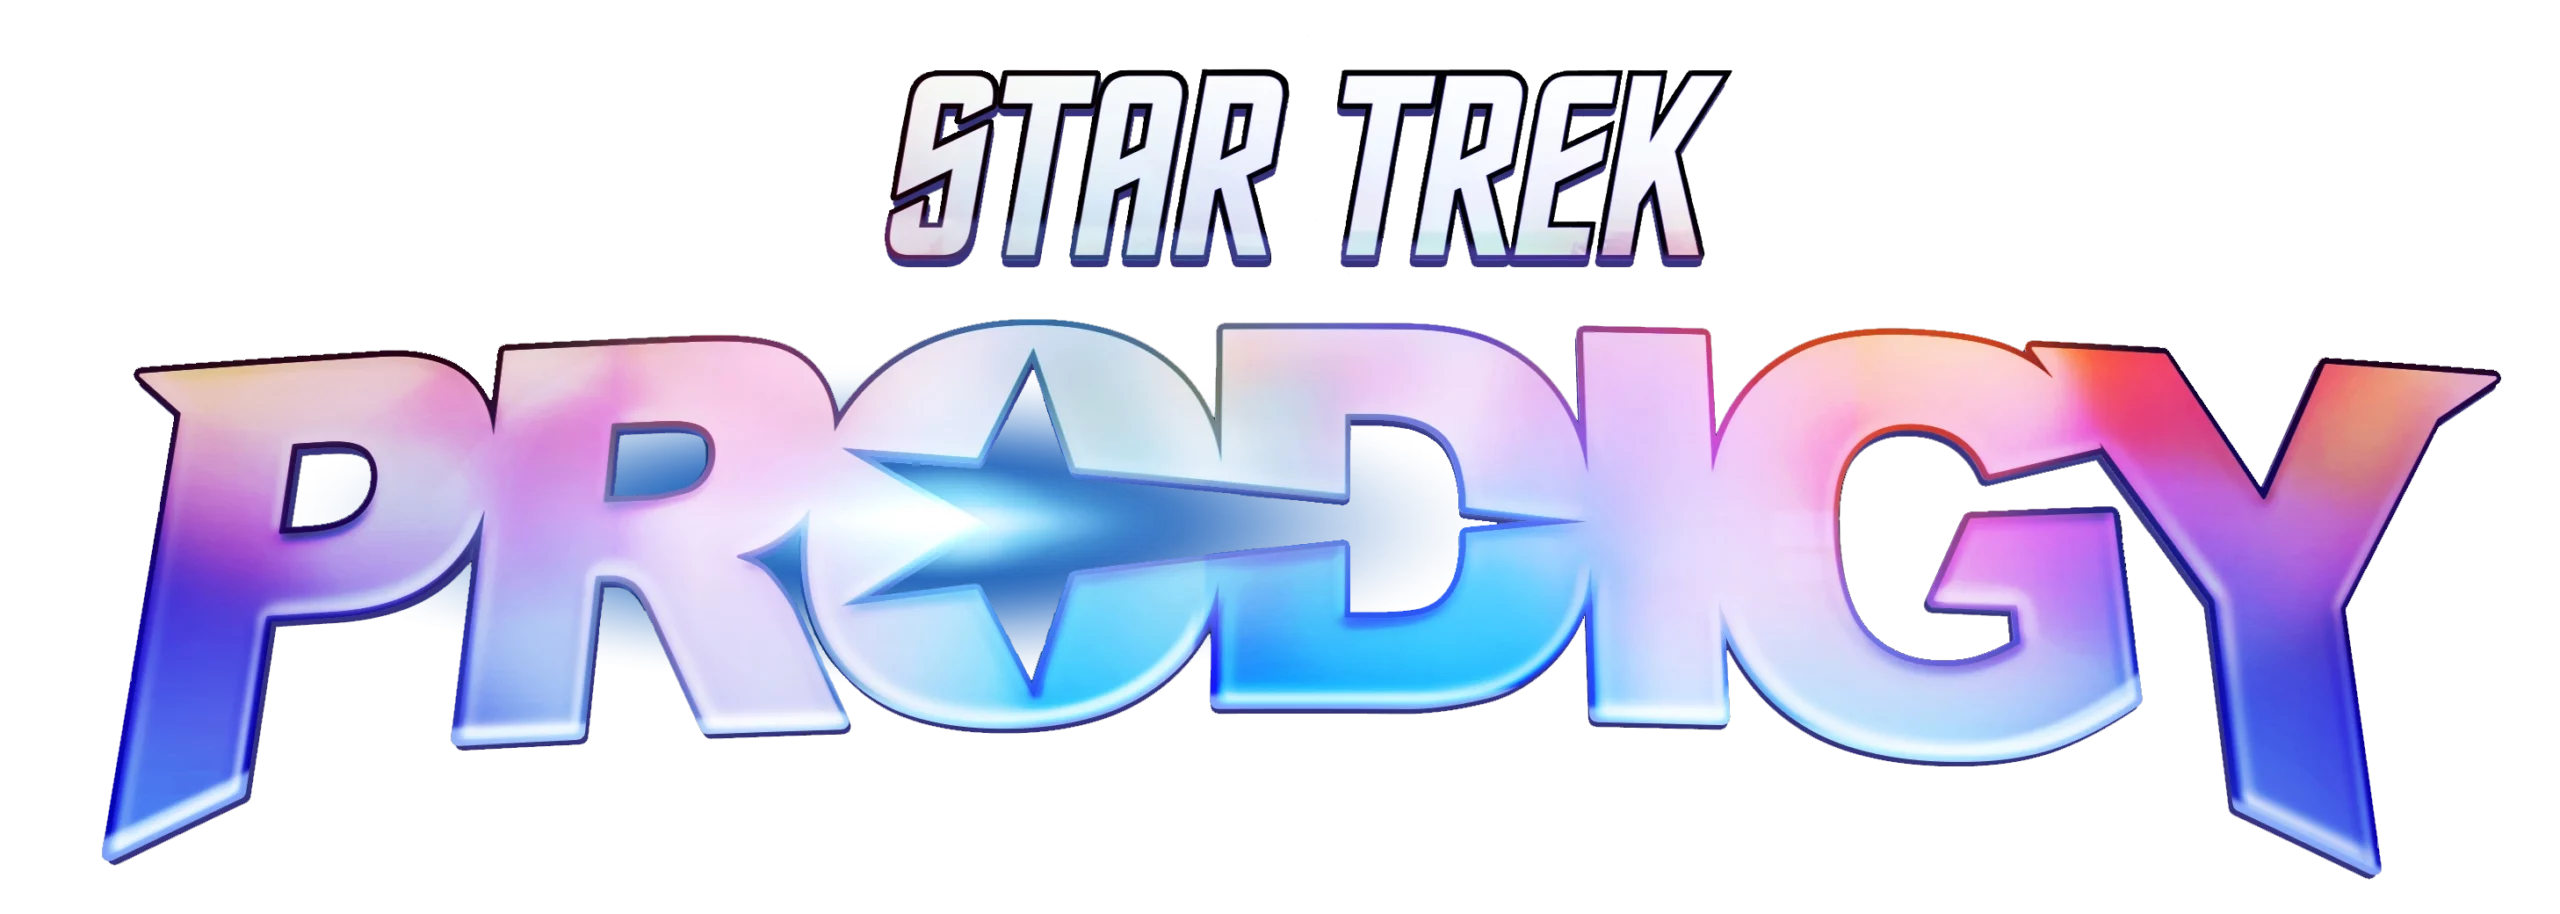 Star Trek: Prodigy Season 2 Cancelled Among 4 Shows Axed By Paramount ...